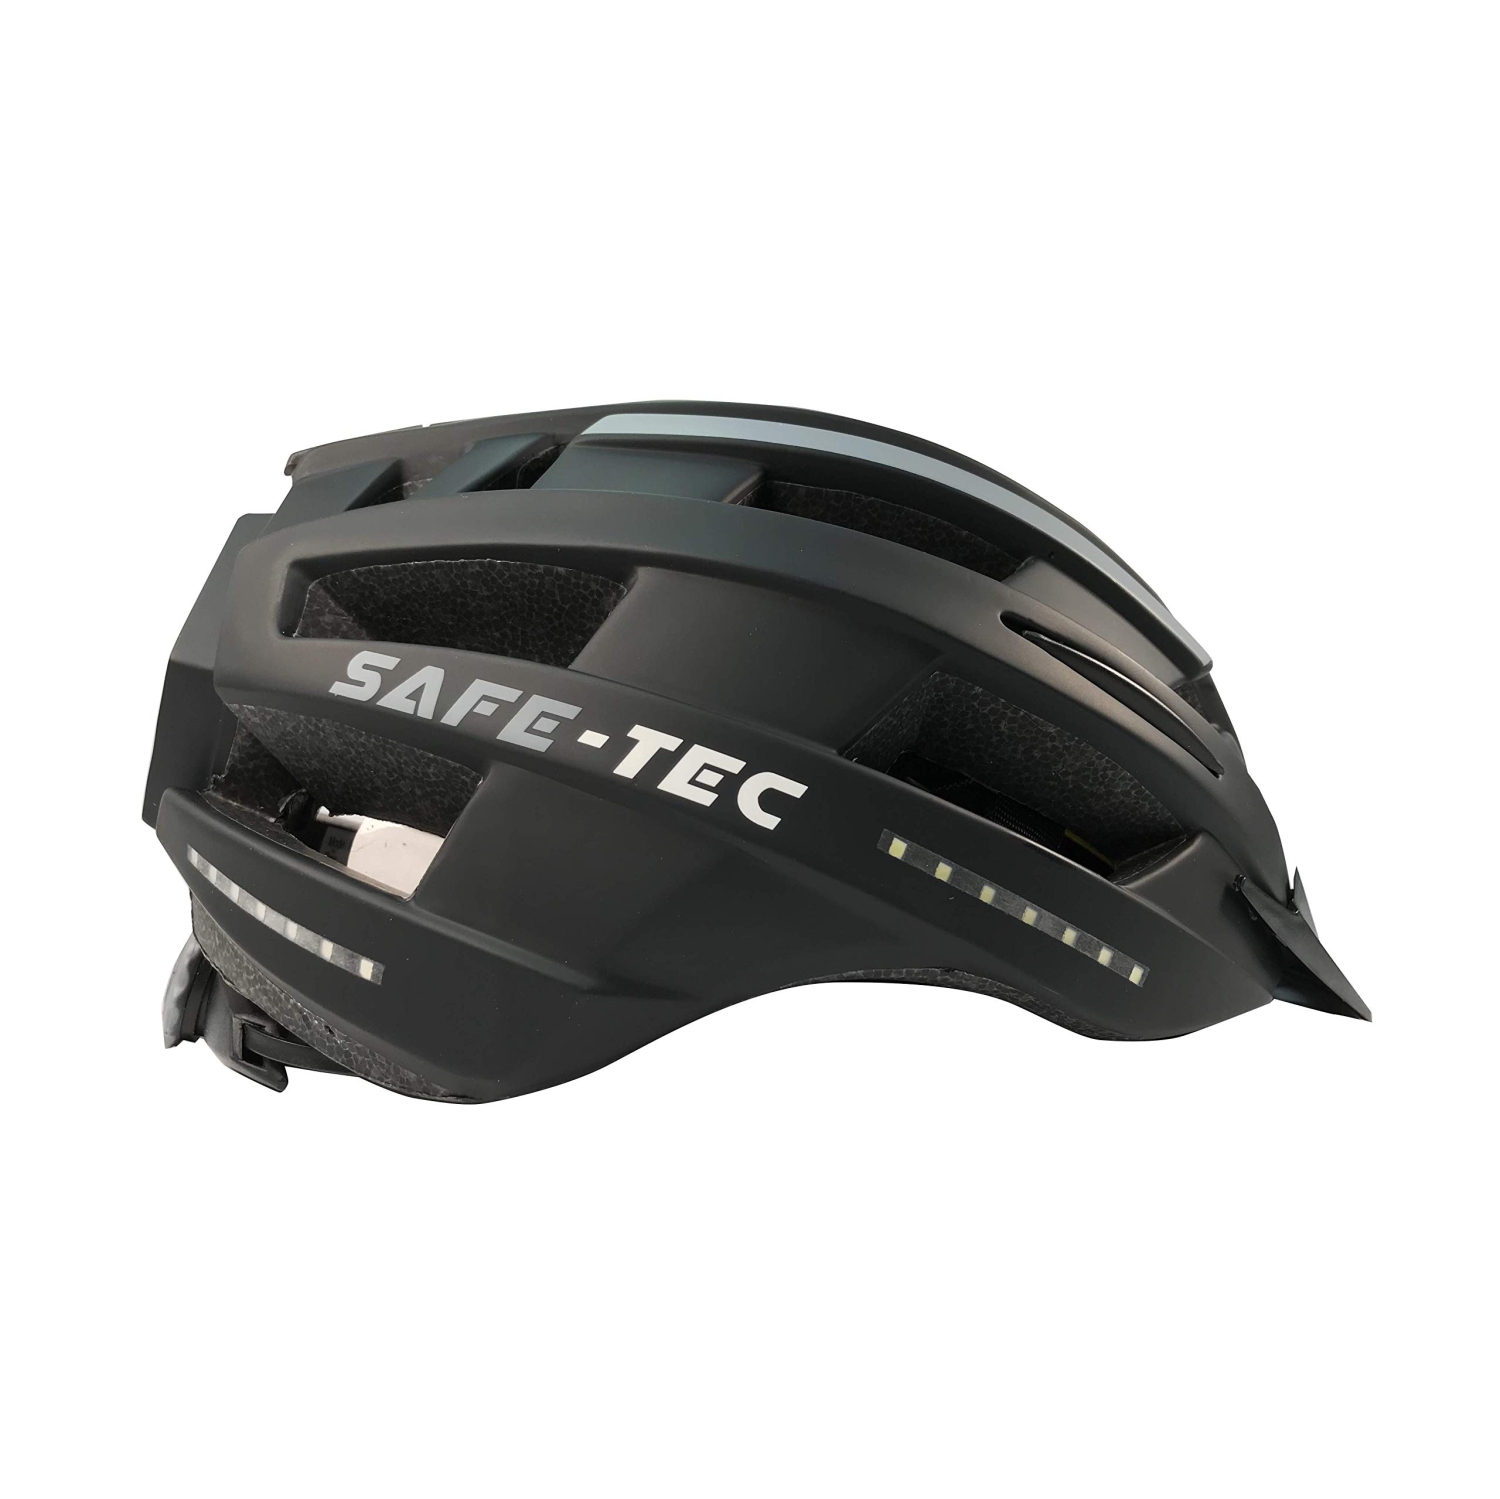 Safe-Tec Asgard Bicycle Smart Helmet with MIPS & Turn Signals and Bone Conduction Speakers (Black Silver, Medium)